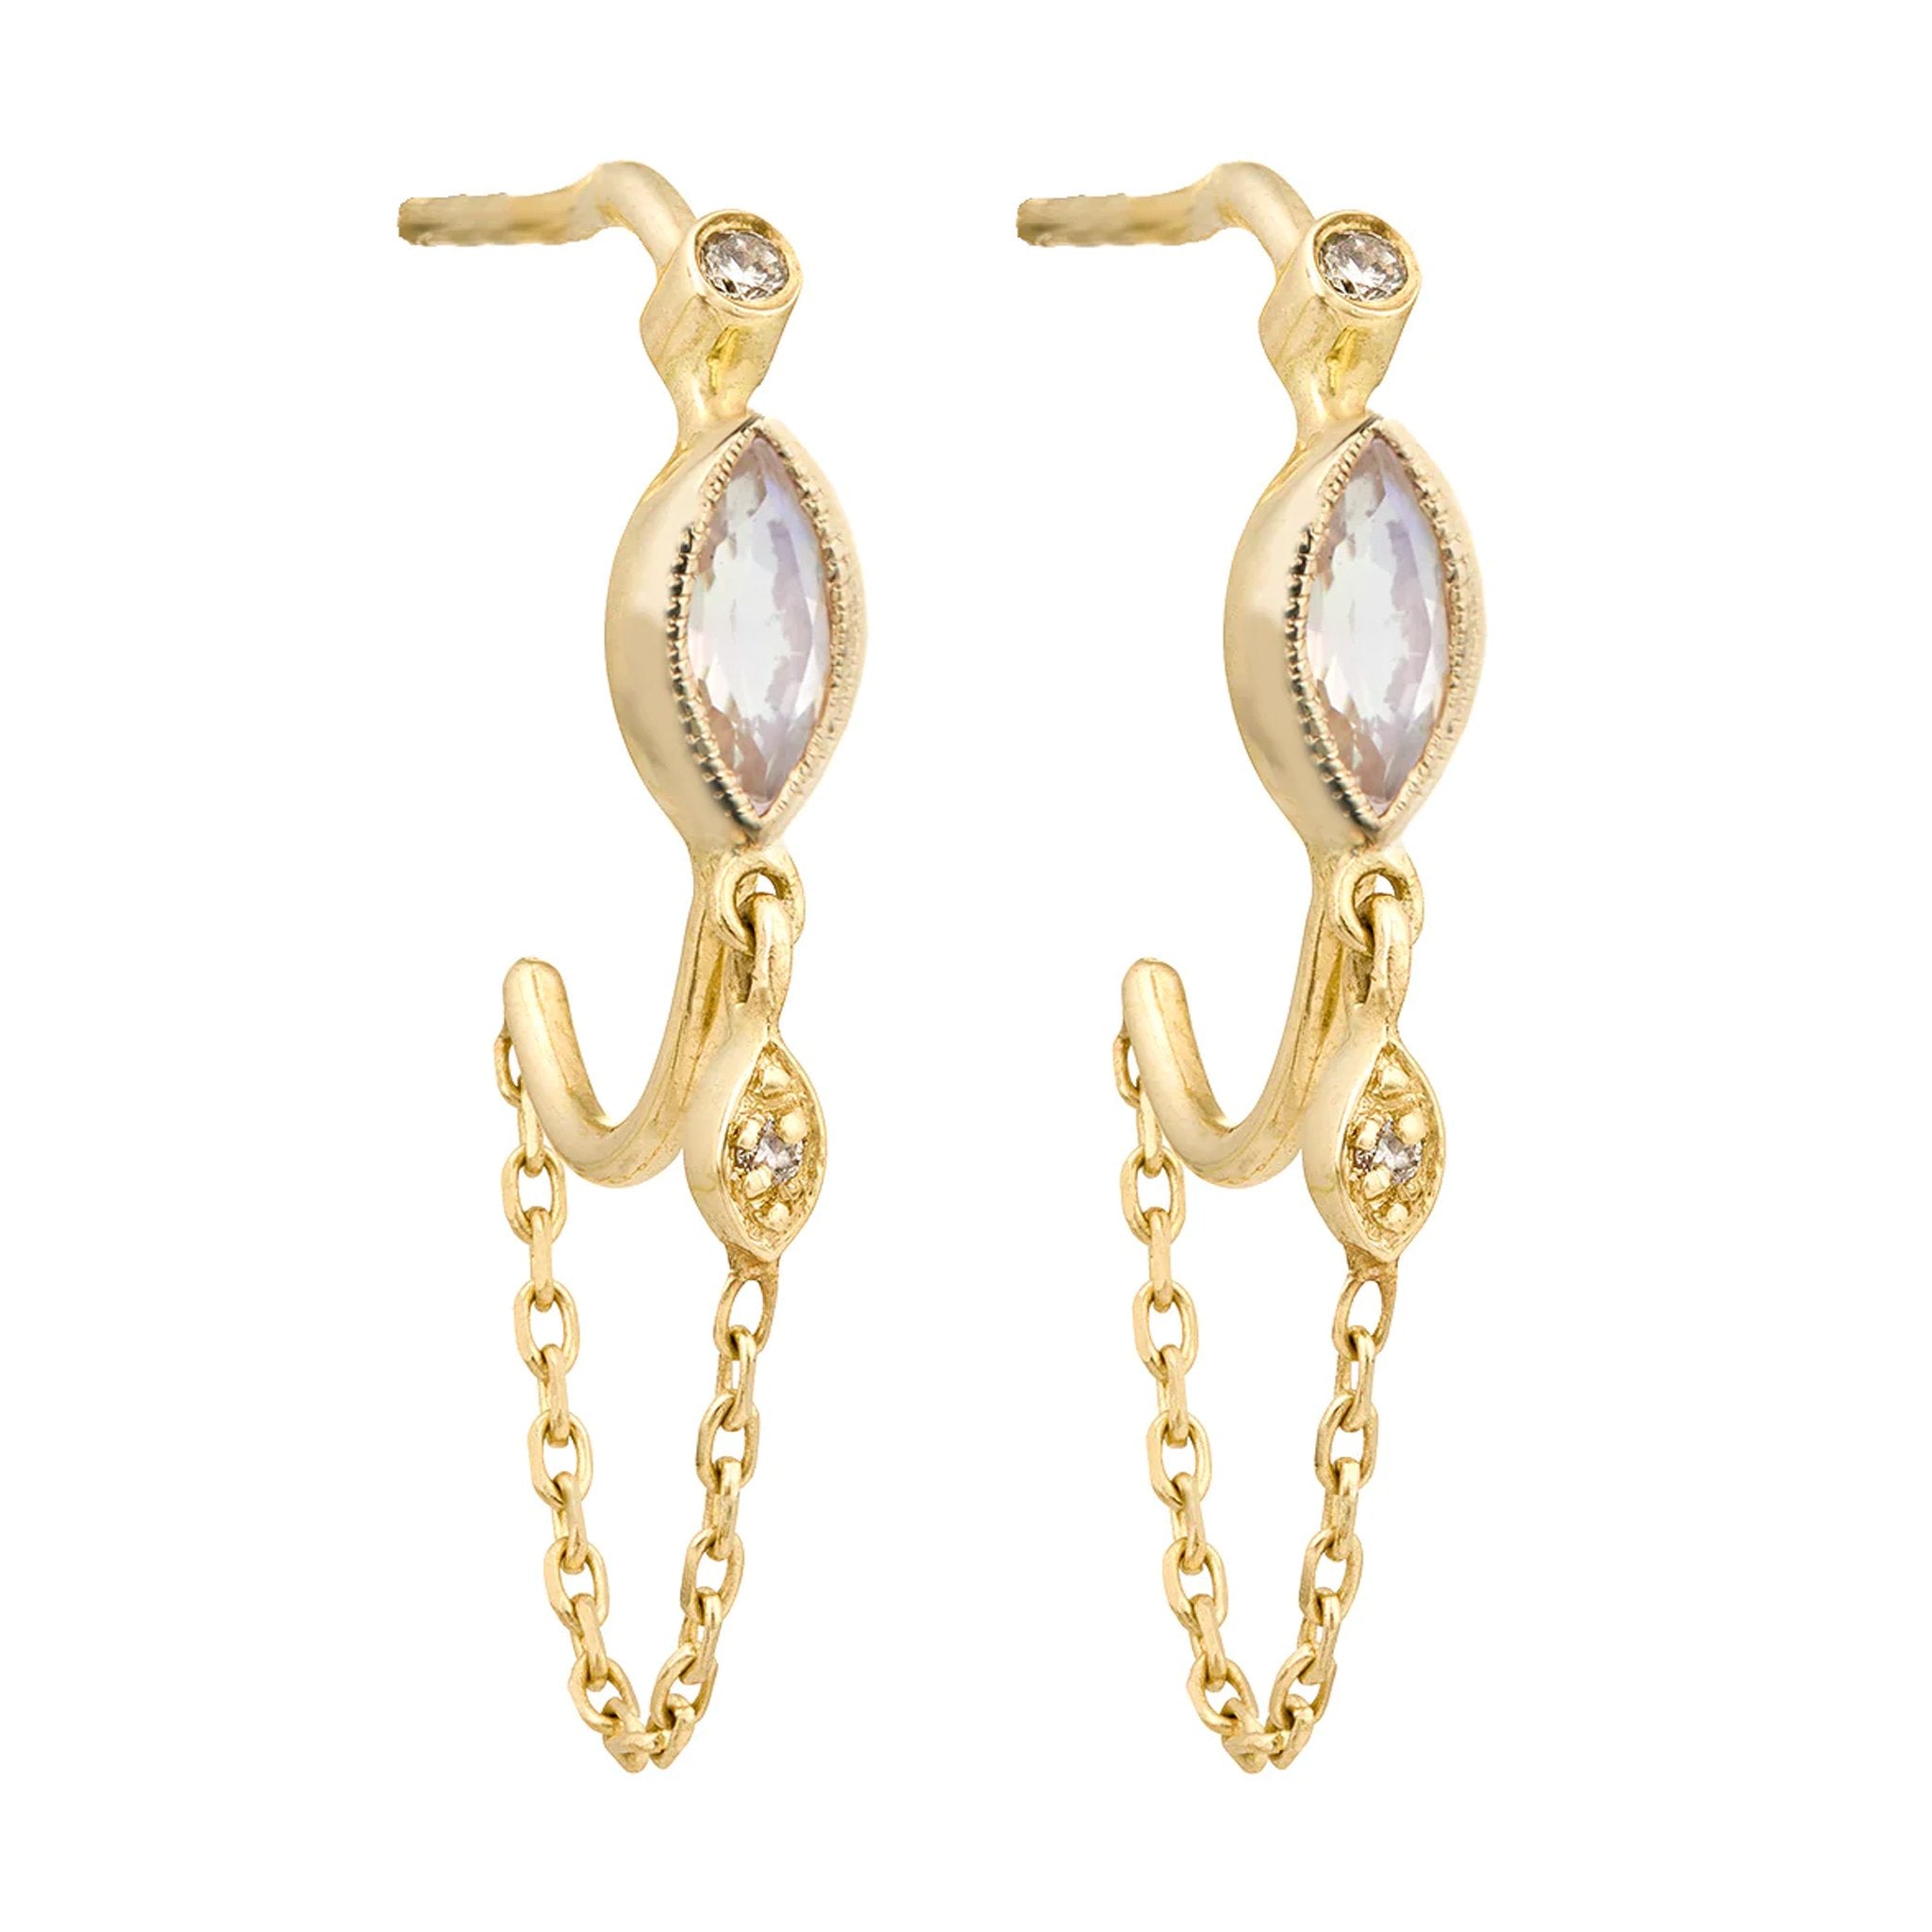 Celine Daoust Gold Bezel-Set Marquise Moonstone Hoop Earrings with Chain